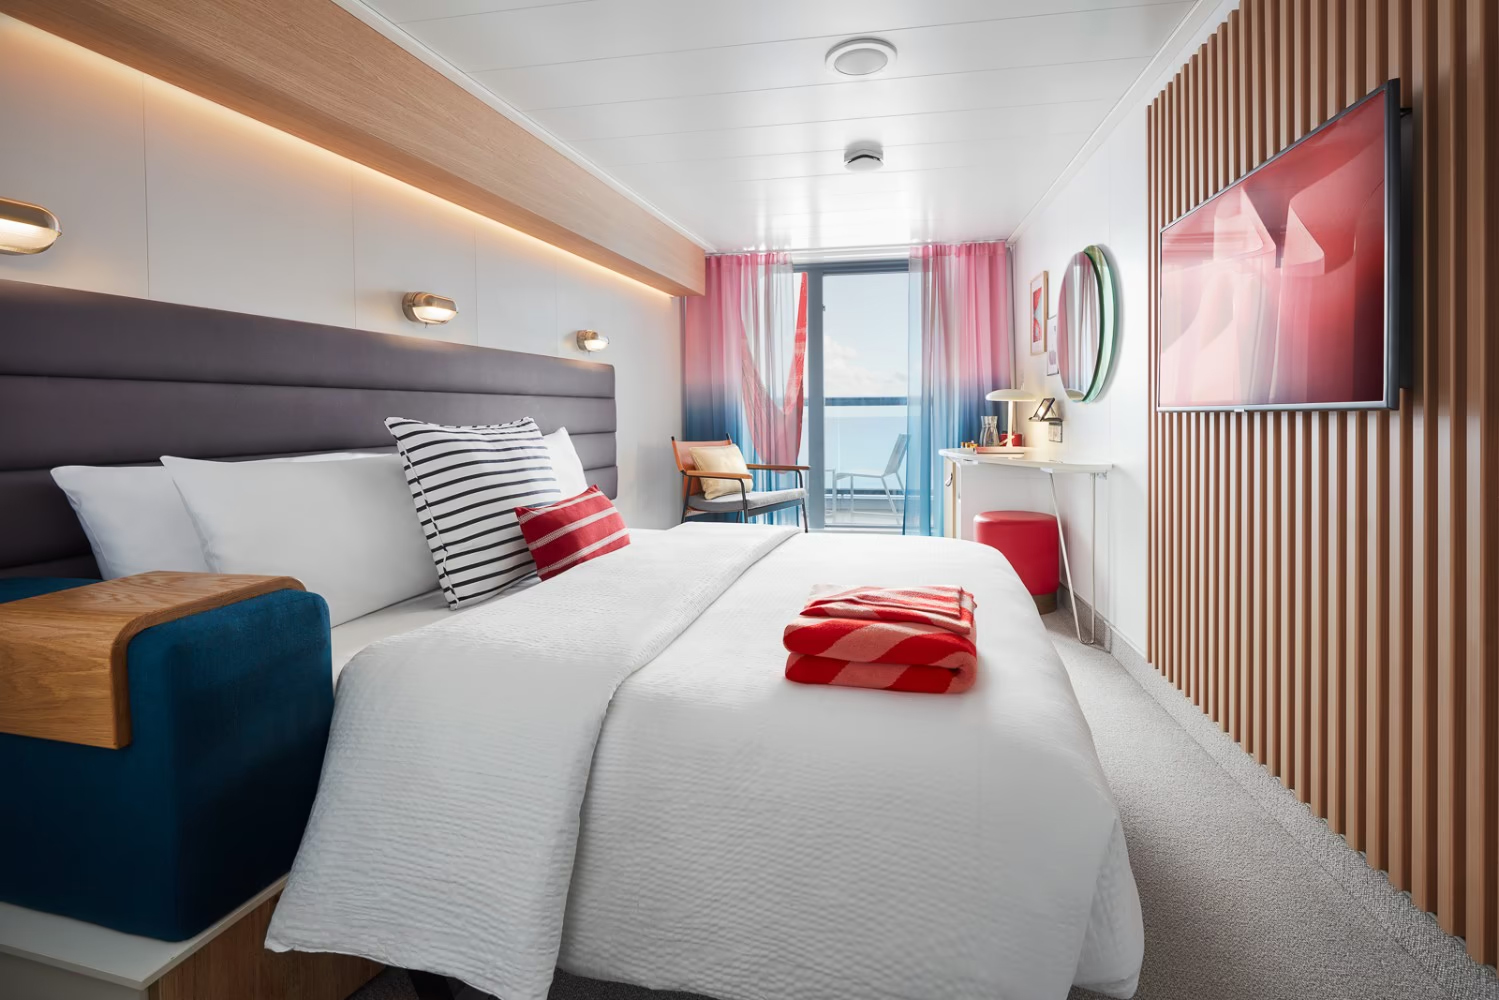 What Are Virgin Cruise Cabins Like?